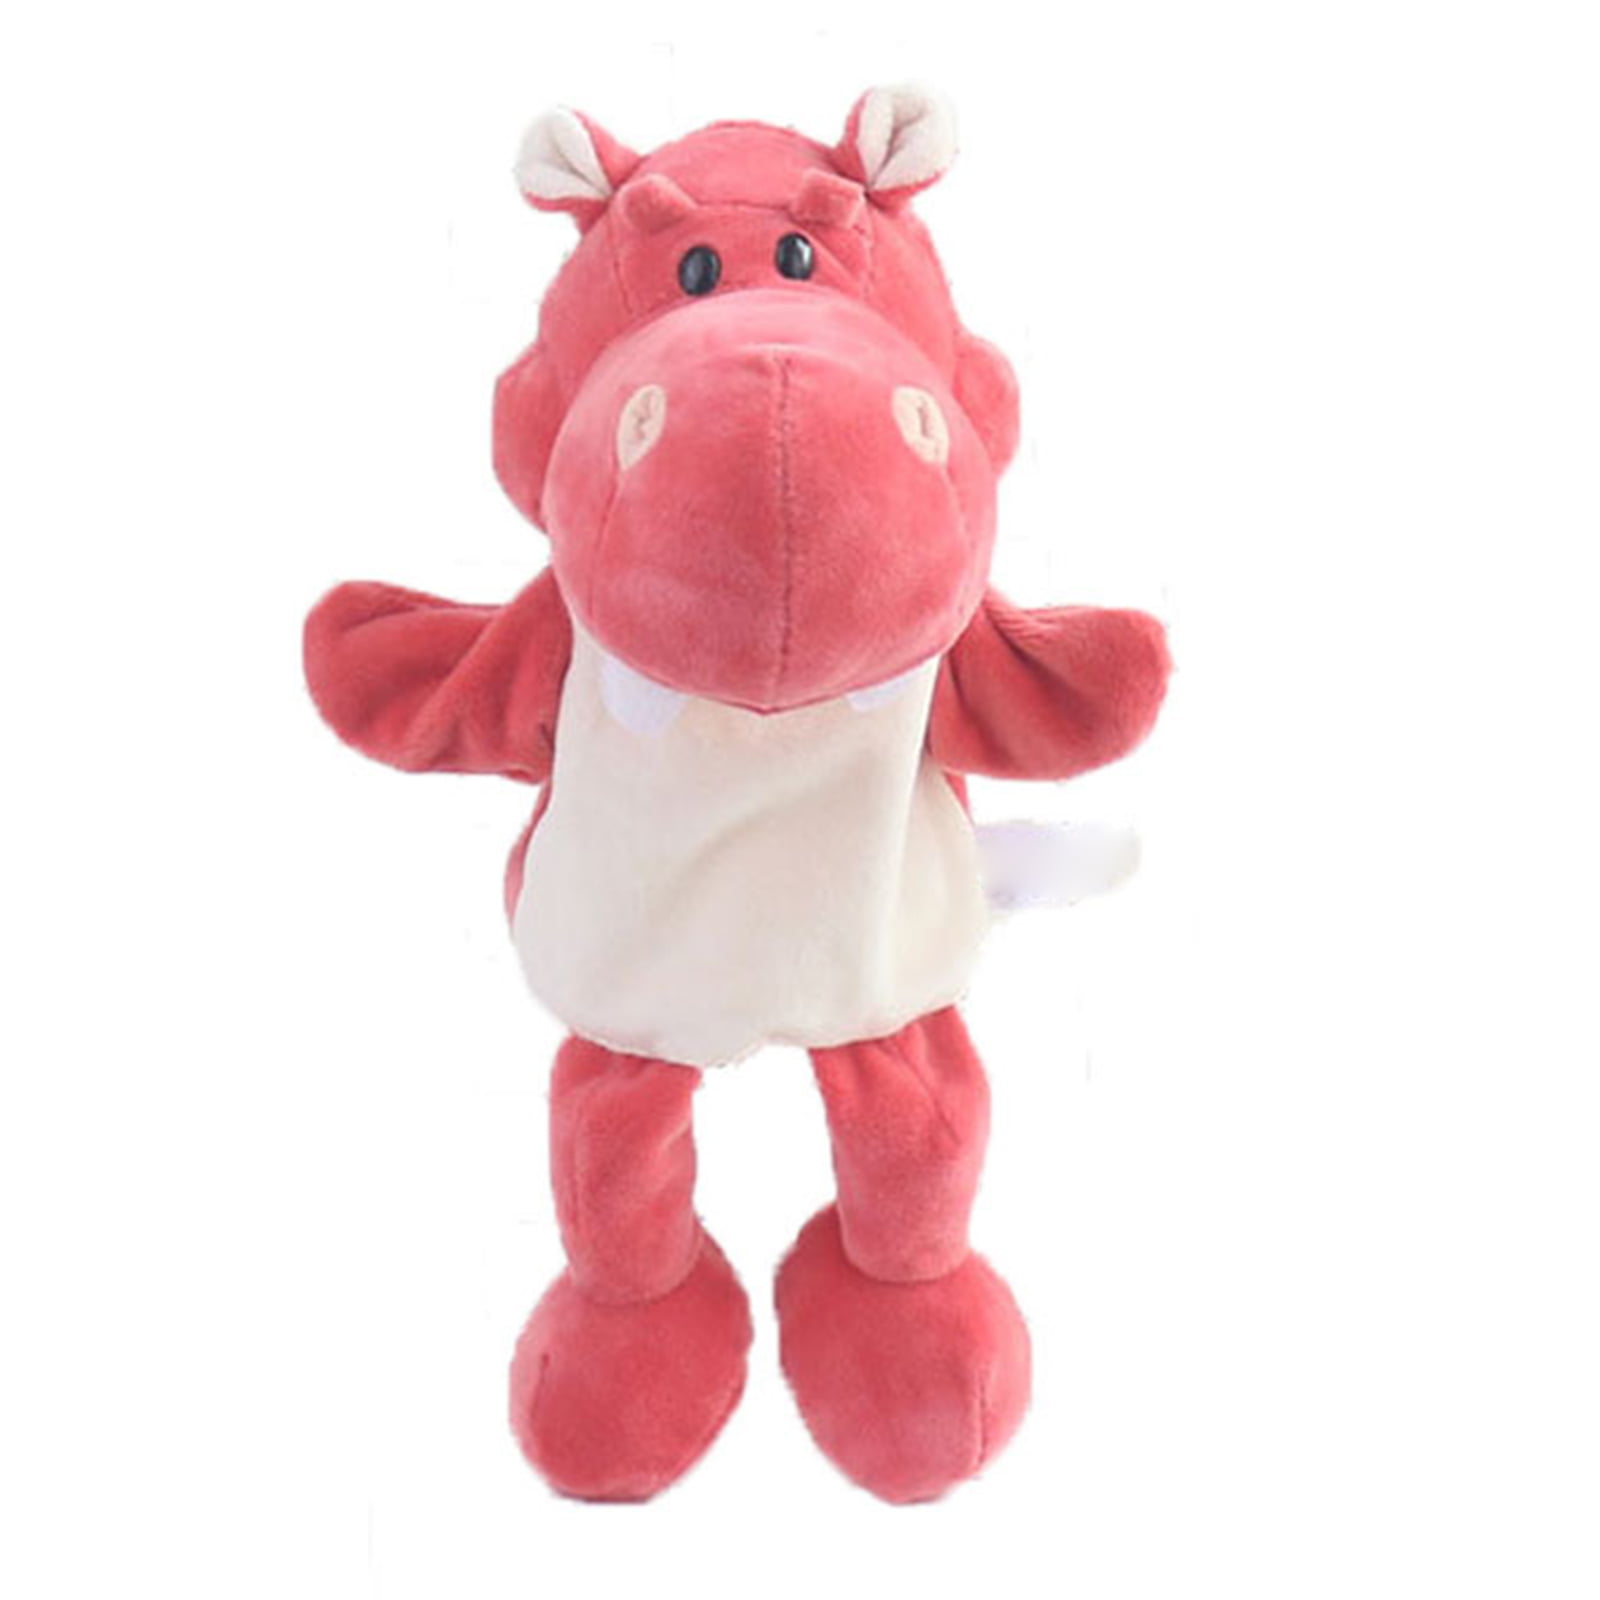 Hippo Soft Plush Animal Hand Puppets for Kids Storytelling Game Props 